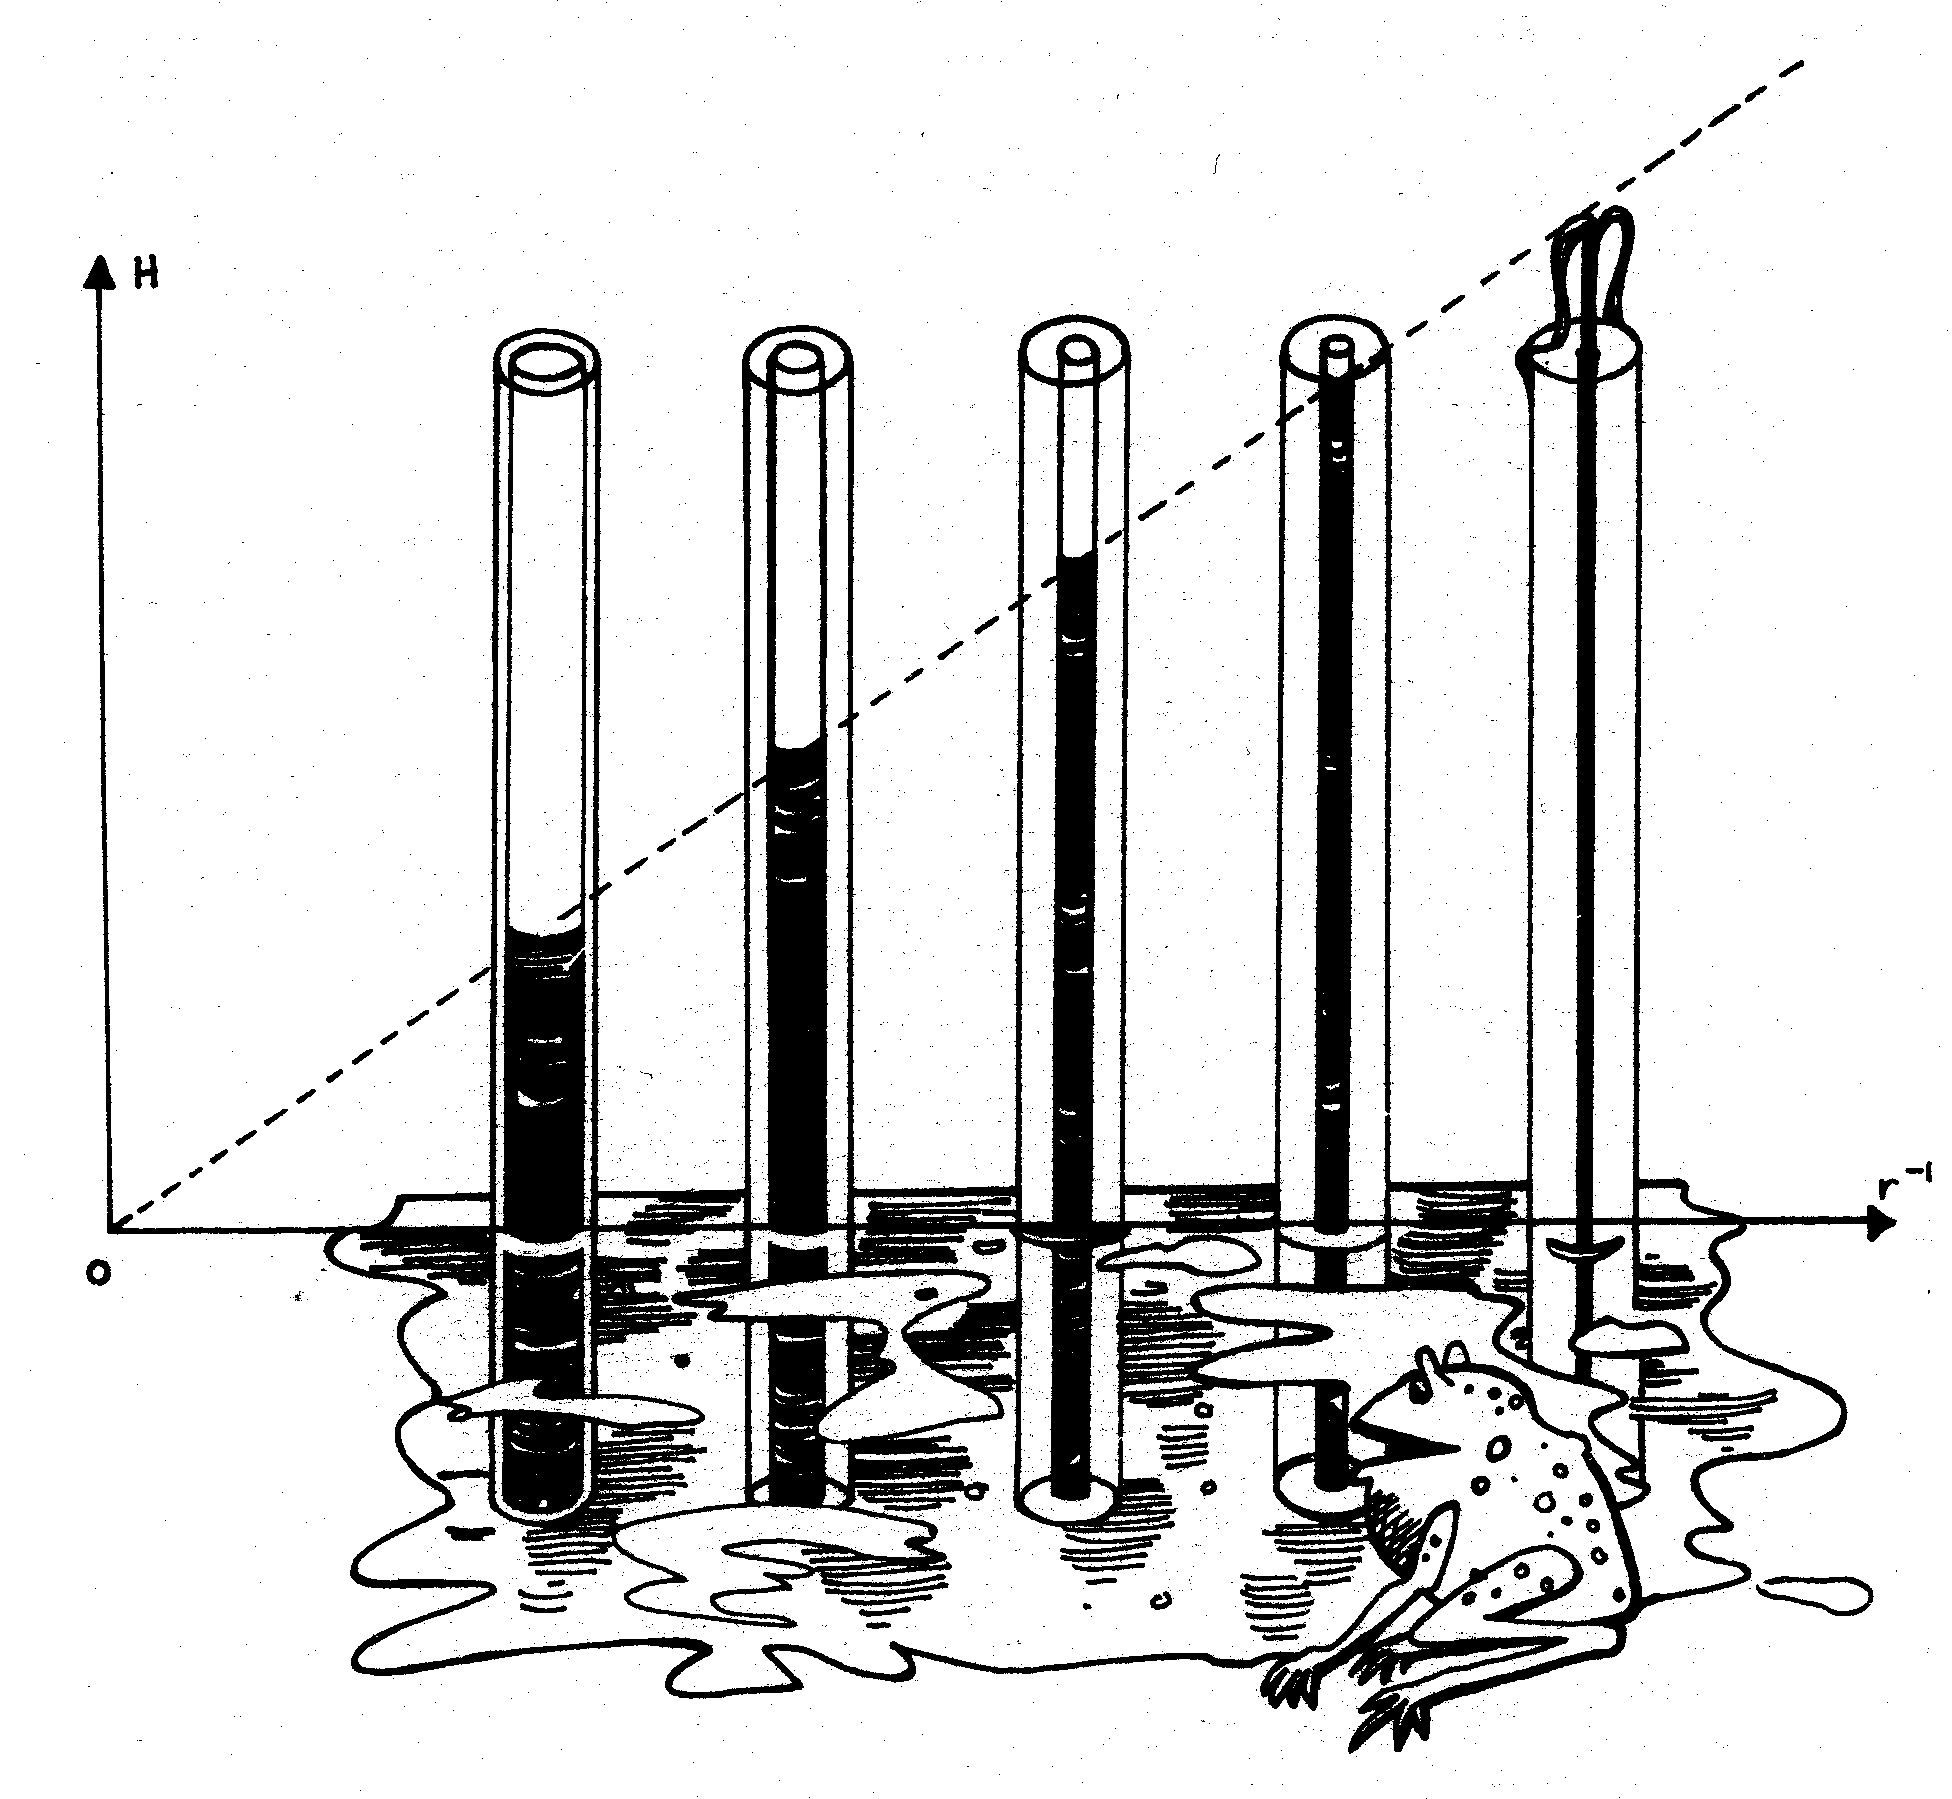 A series of capillary tubes are shown standing verttcally in water, with bottom end in water, top end open to air. The water is shown to be elevated in each tube to a height h = K/r, where r is the radius of the capillary.  It follows unambiguously, that, for a sufficiently narrow tube, the water will be raised to a height greater than the height (abobe water) of the tube -- thus producing a fountain, and providing inexhaustible perpetual motion. The wise from poners.